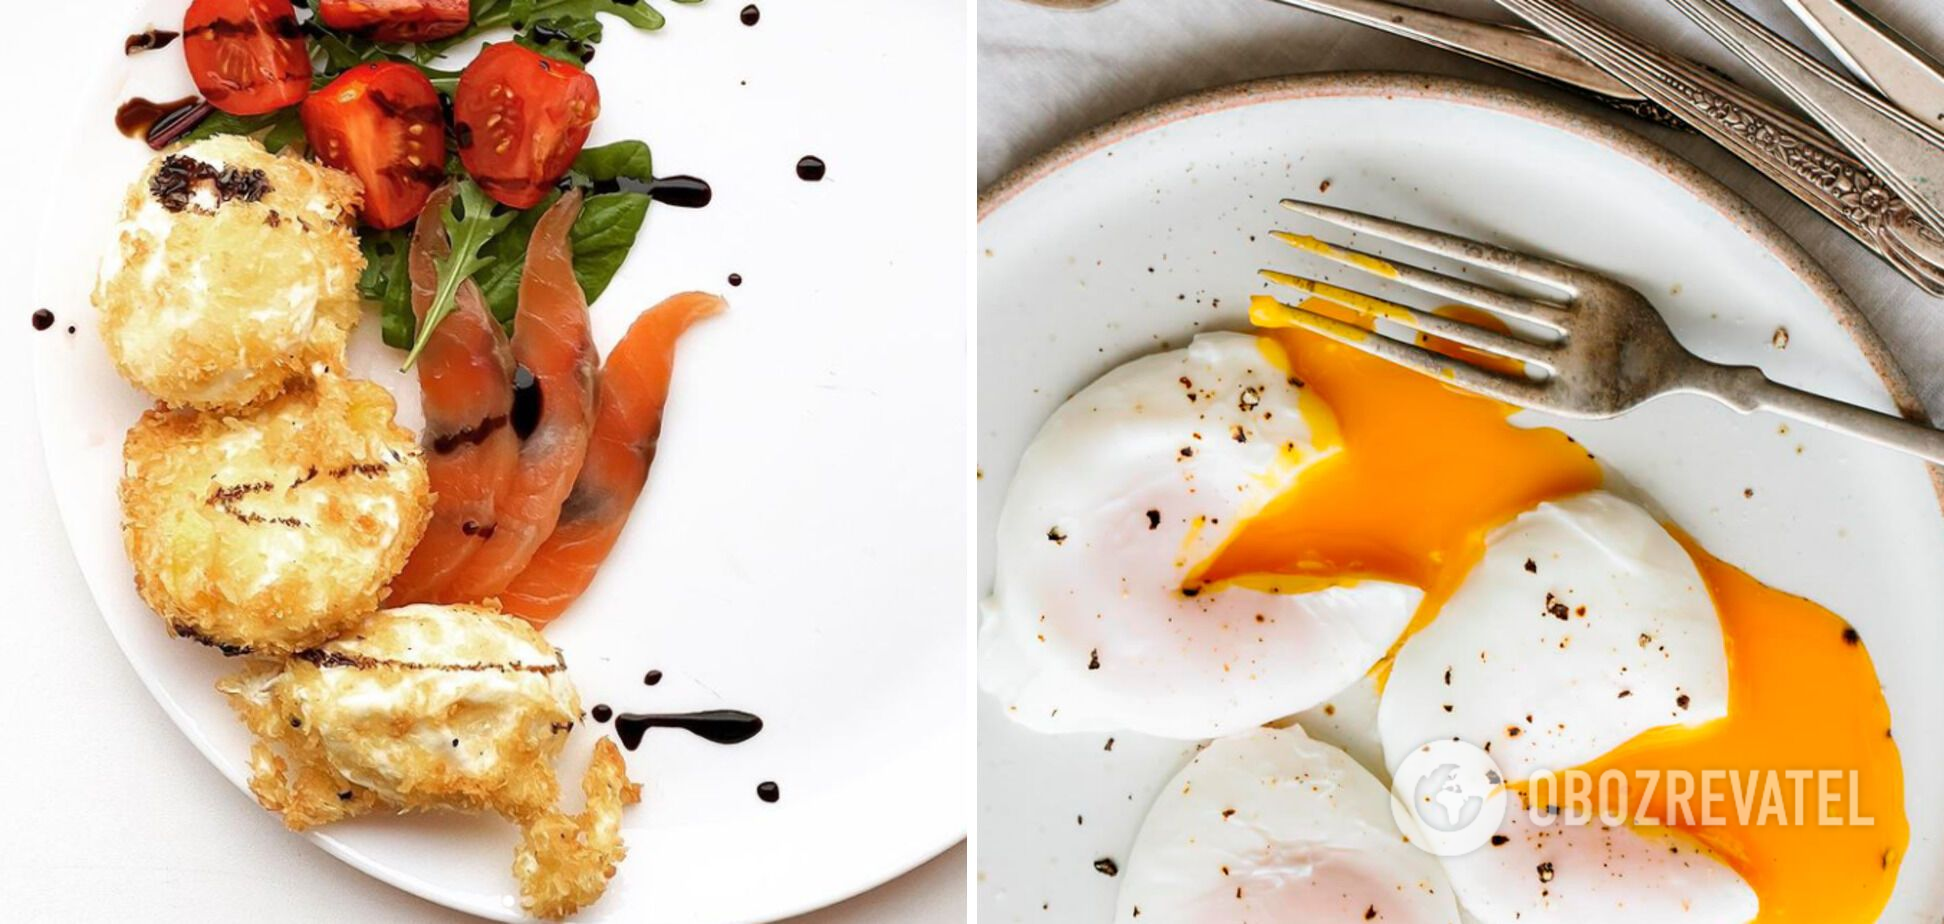 How to cook a poached egg correctly